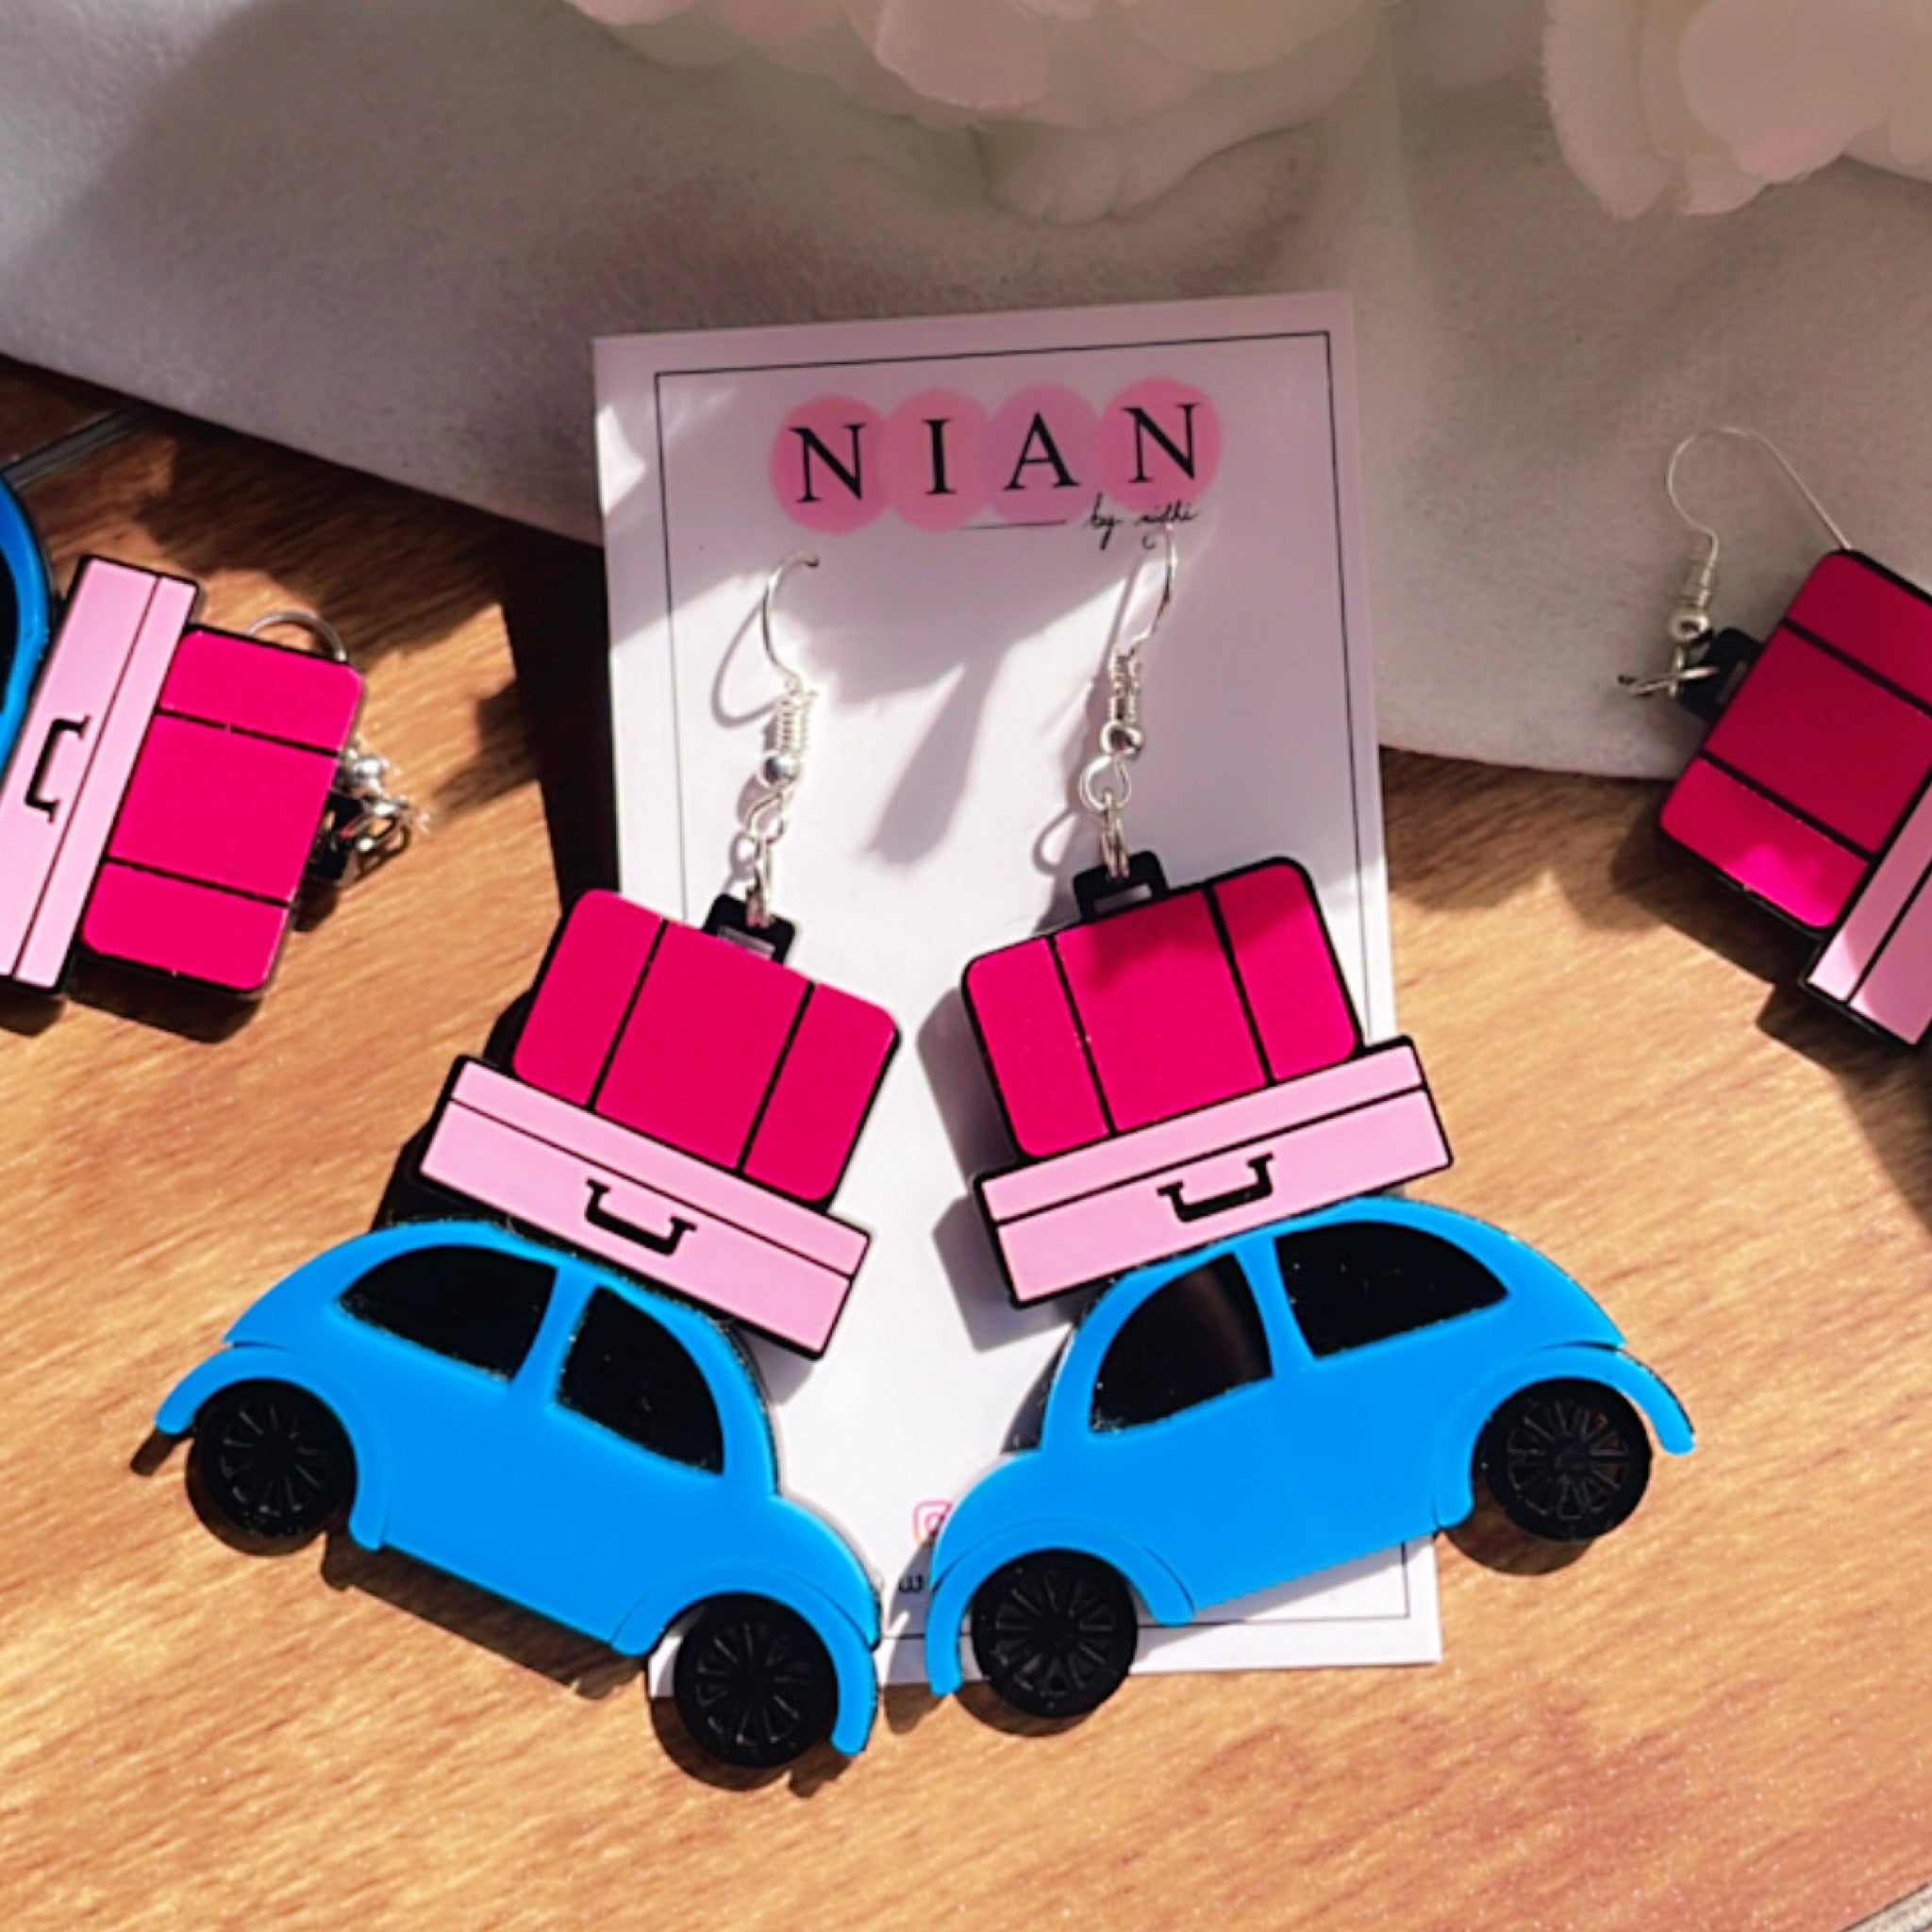 Happy Journey Earrings - Multicolor - Blue, Baby Pink, Dark Pink, Black - Nian by Nidhi - placed in a white and brown background